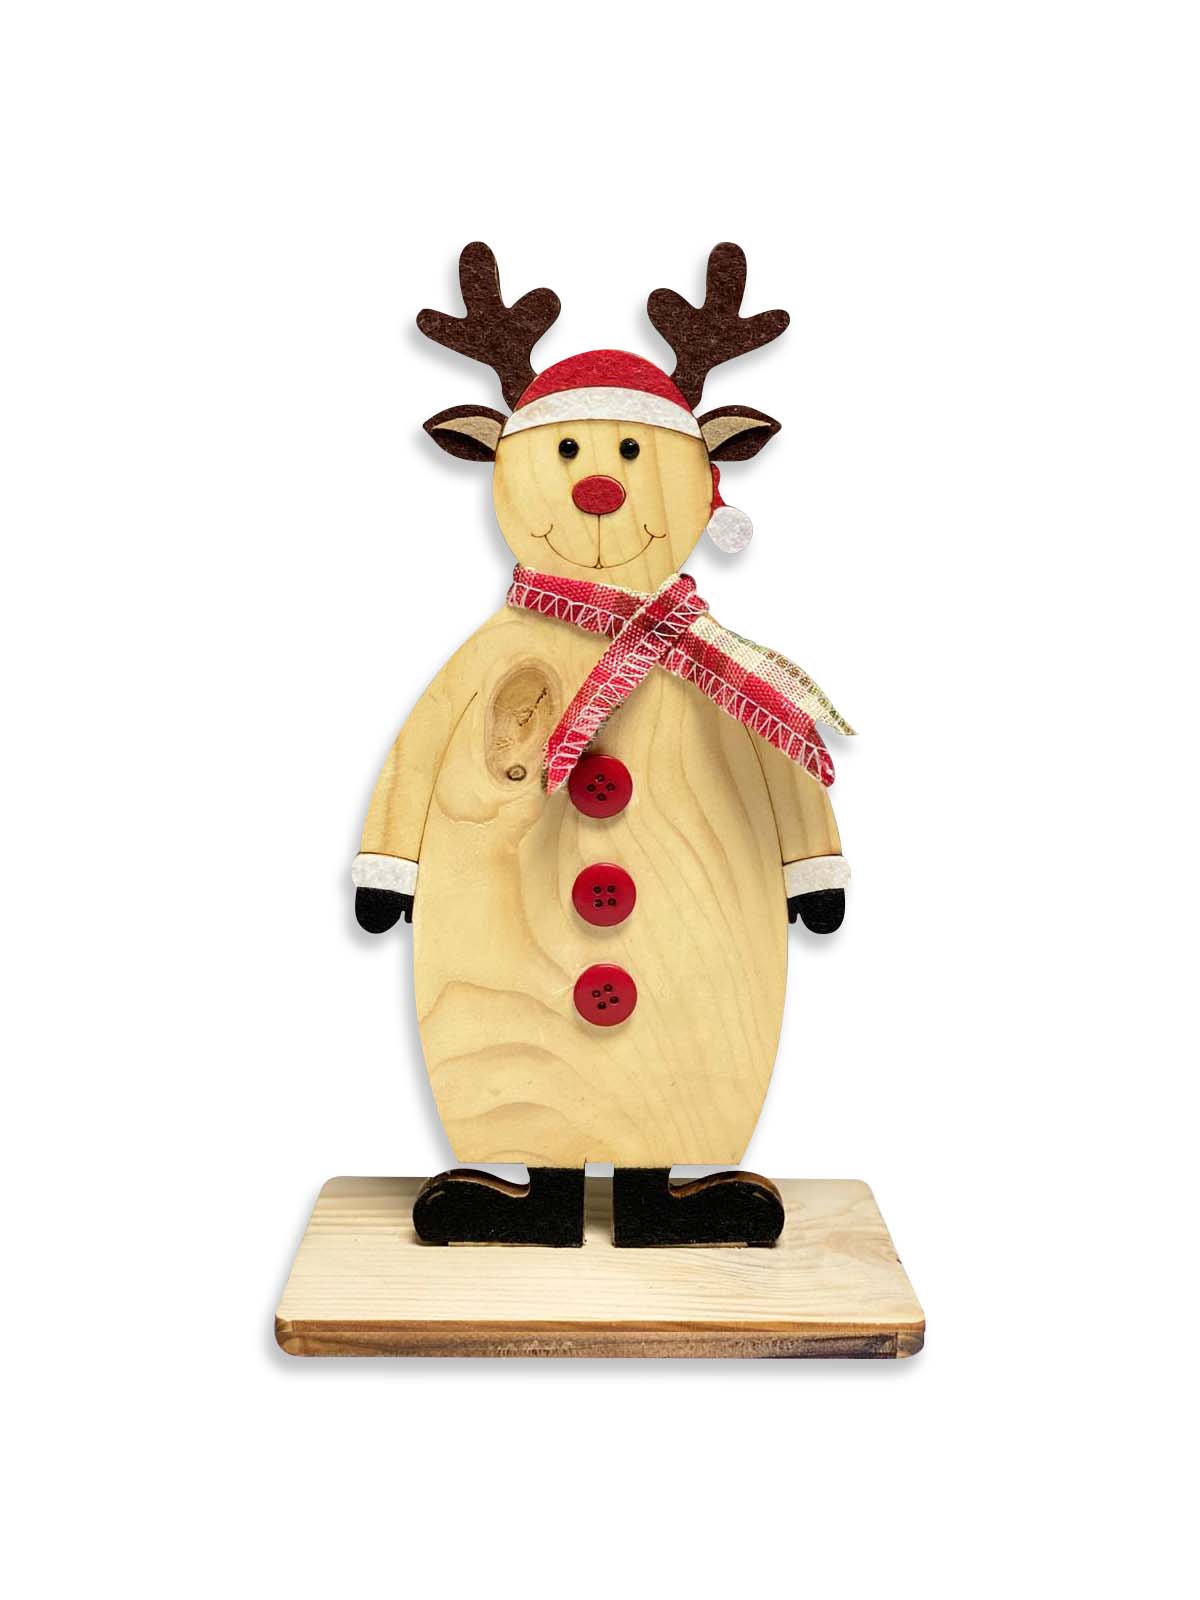 Crafters Collection W006 - Wooden North Pole Reindeer Table Top